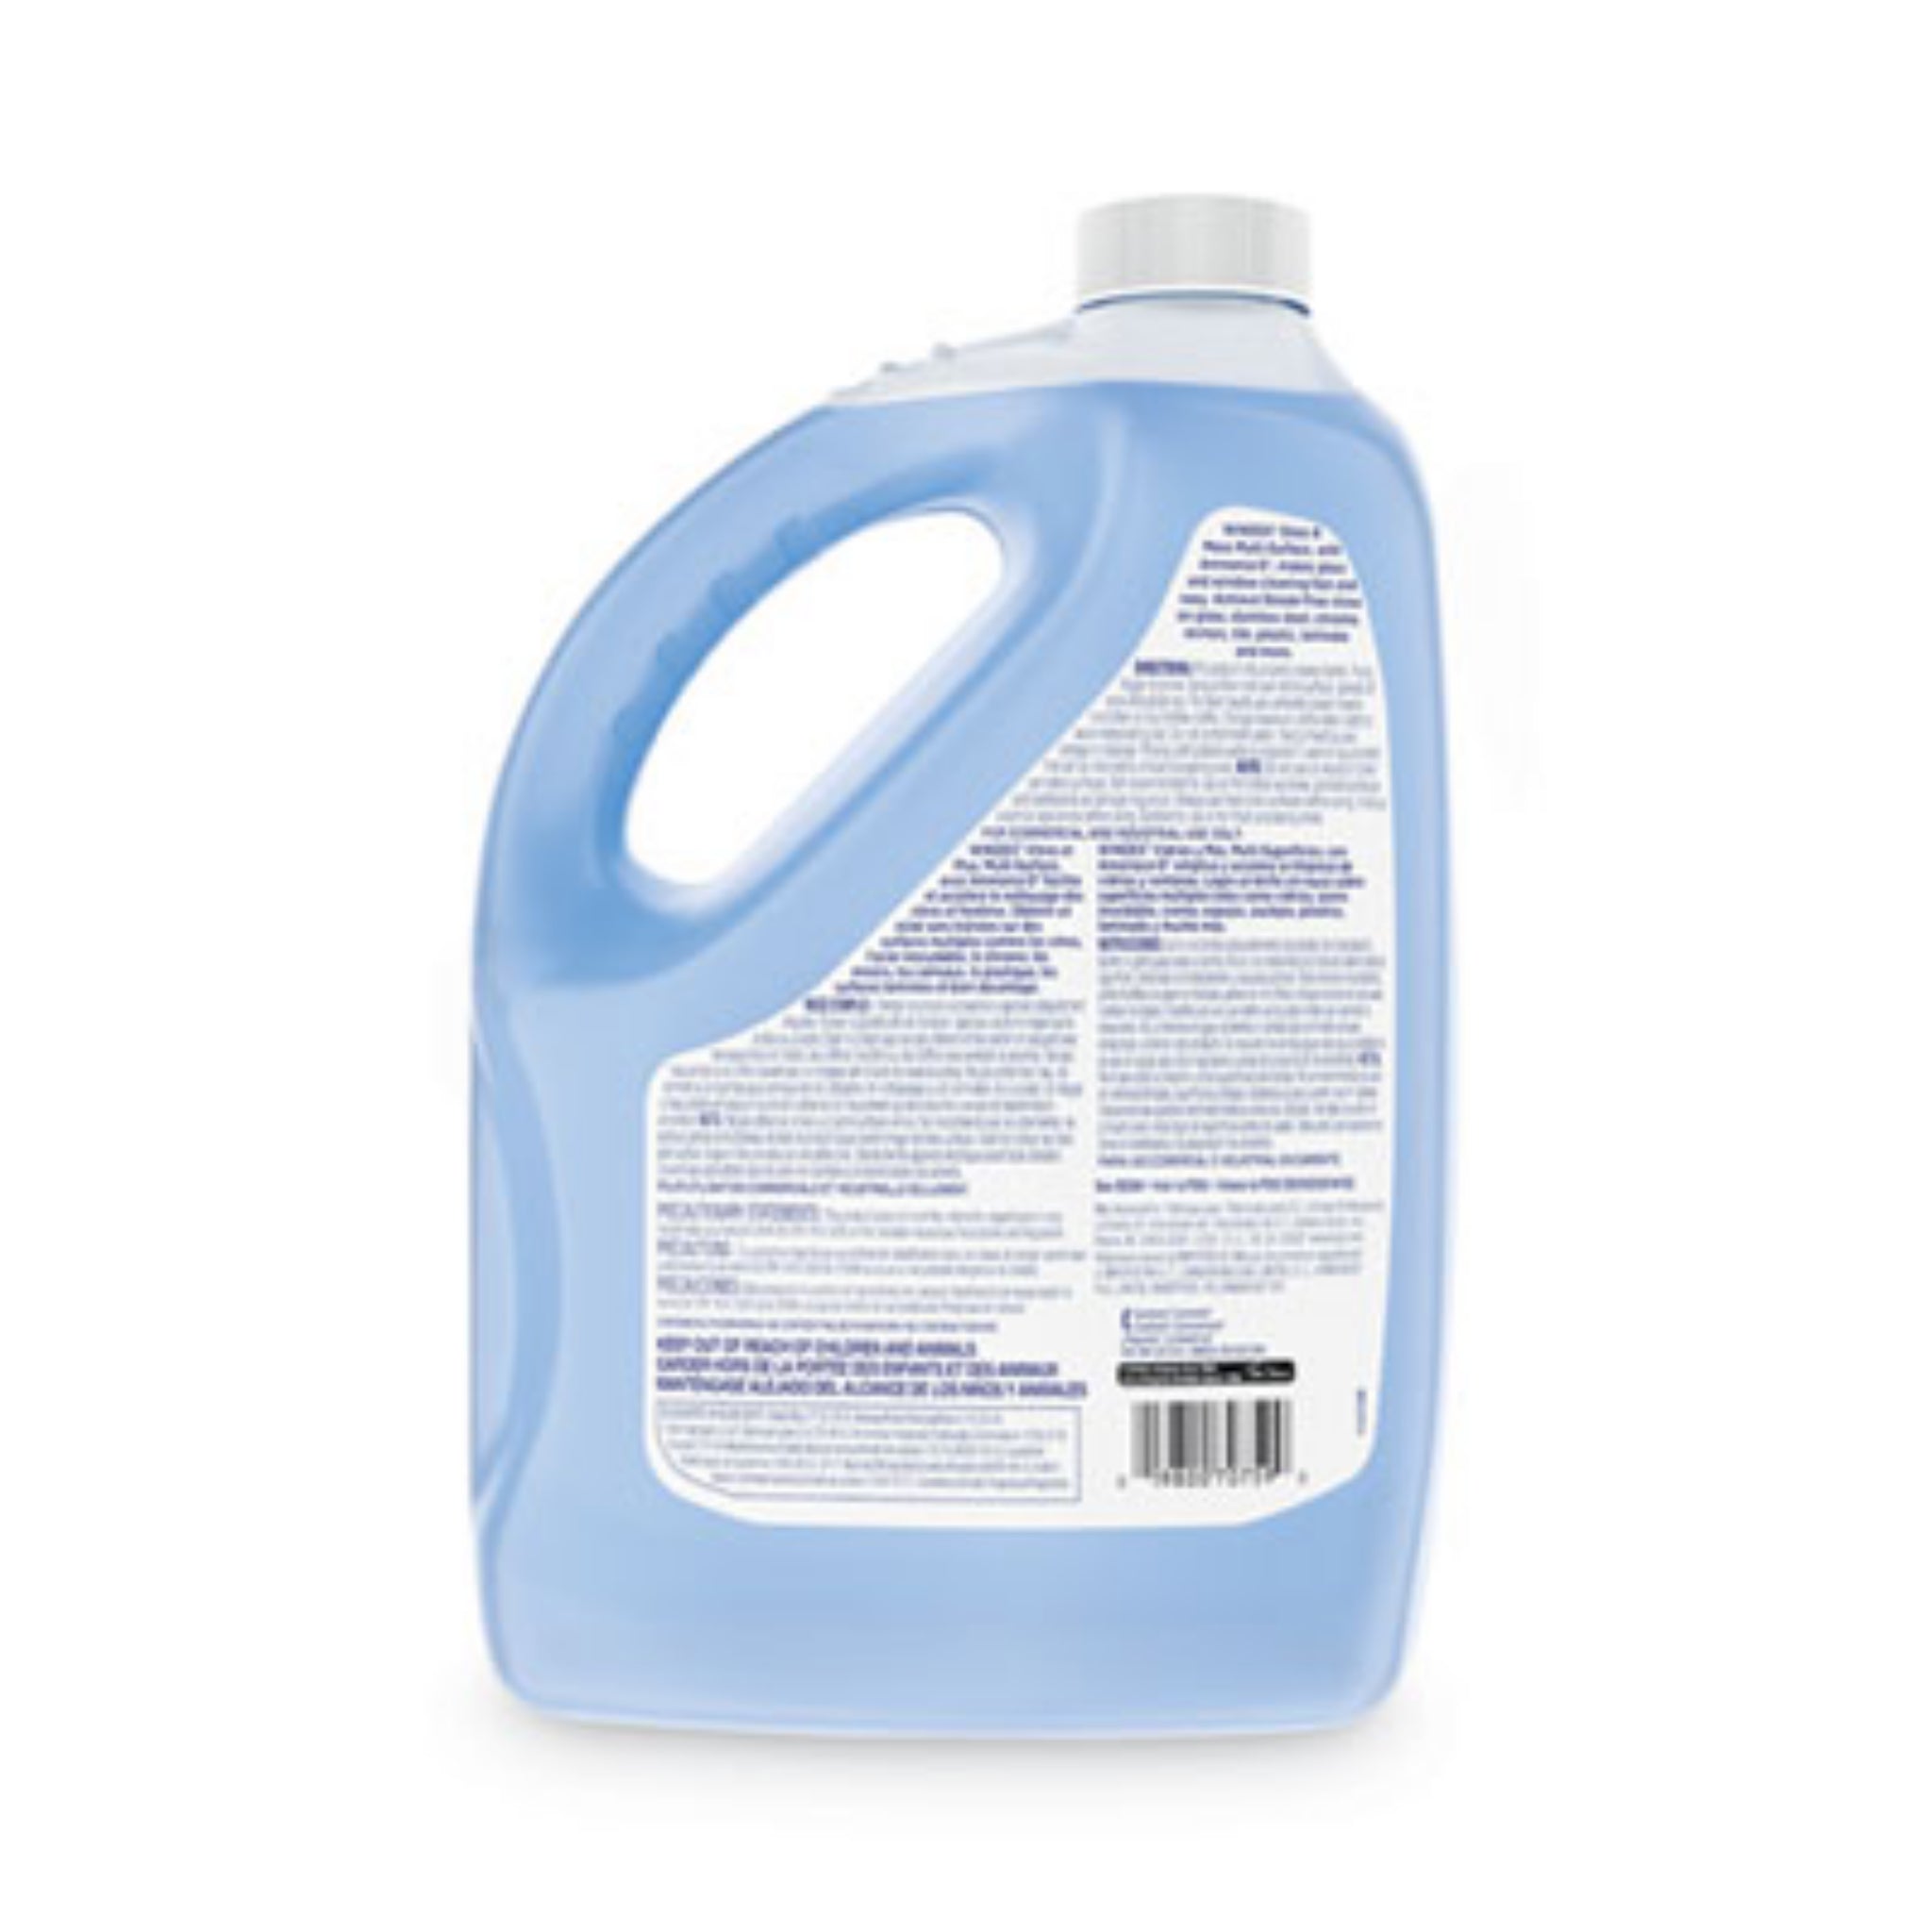 SC JOHNSON SJN696503EA Glass Cleaner With Ammonia-D, Back View